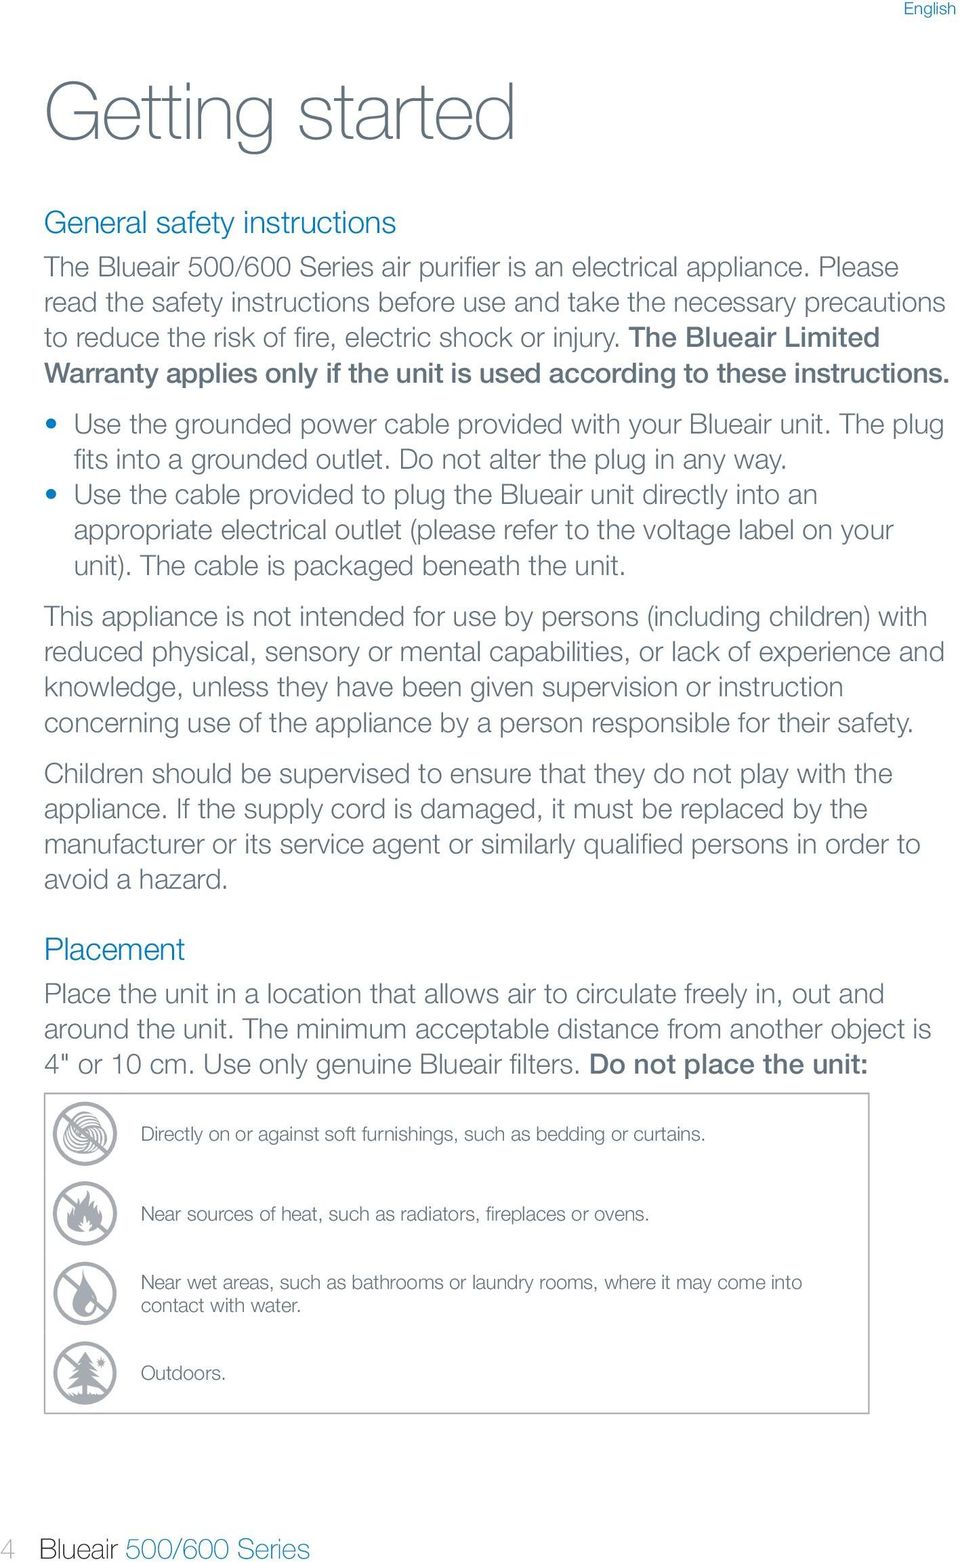 The Blueair Limited Warranty applies only if the unit is used according to these instructions. Use the grounded power cable provided with your Blueair unit. The plug fits into a grounded outlet.